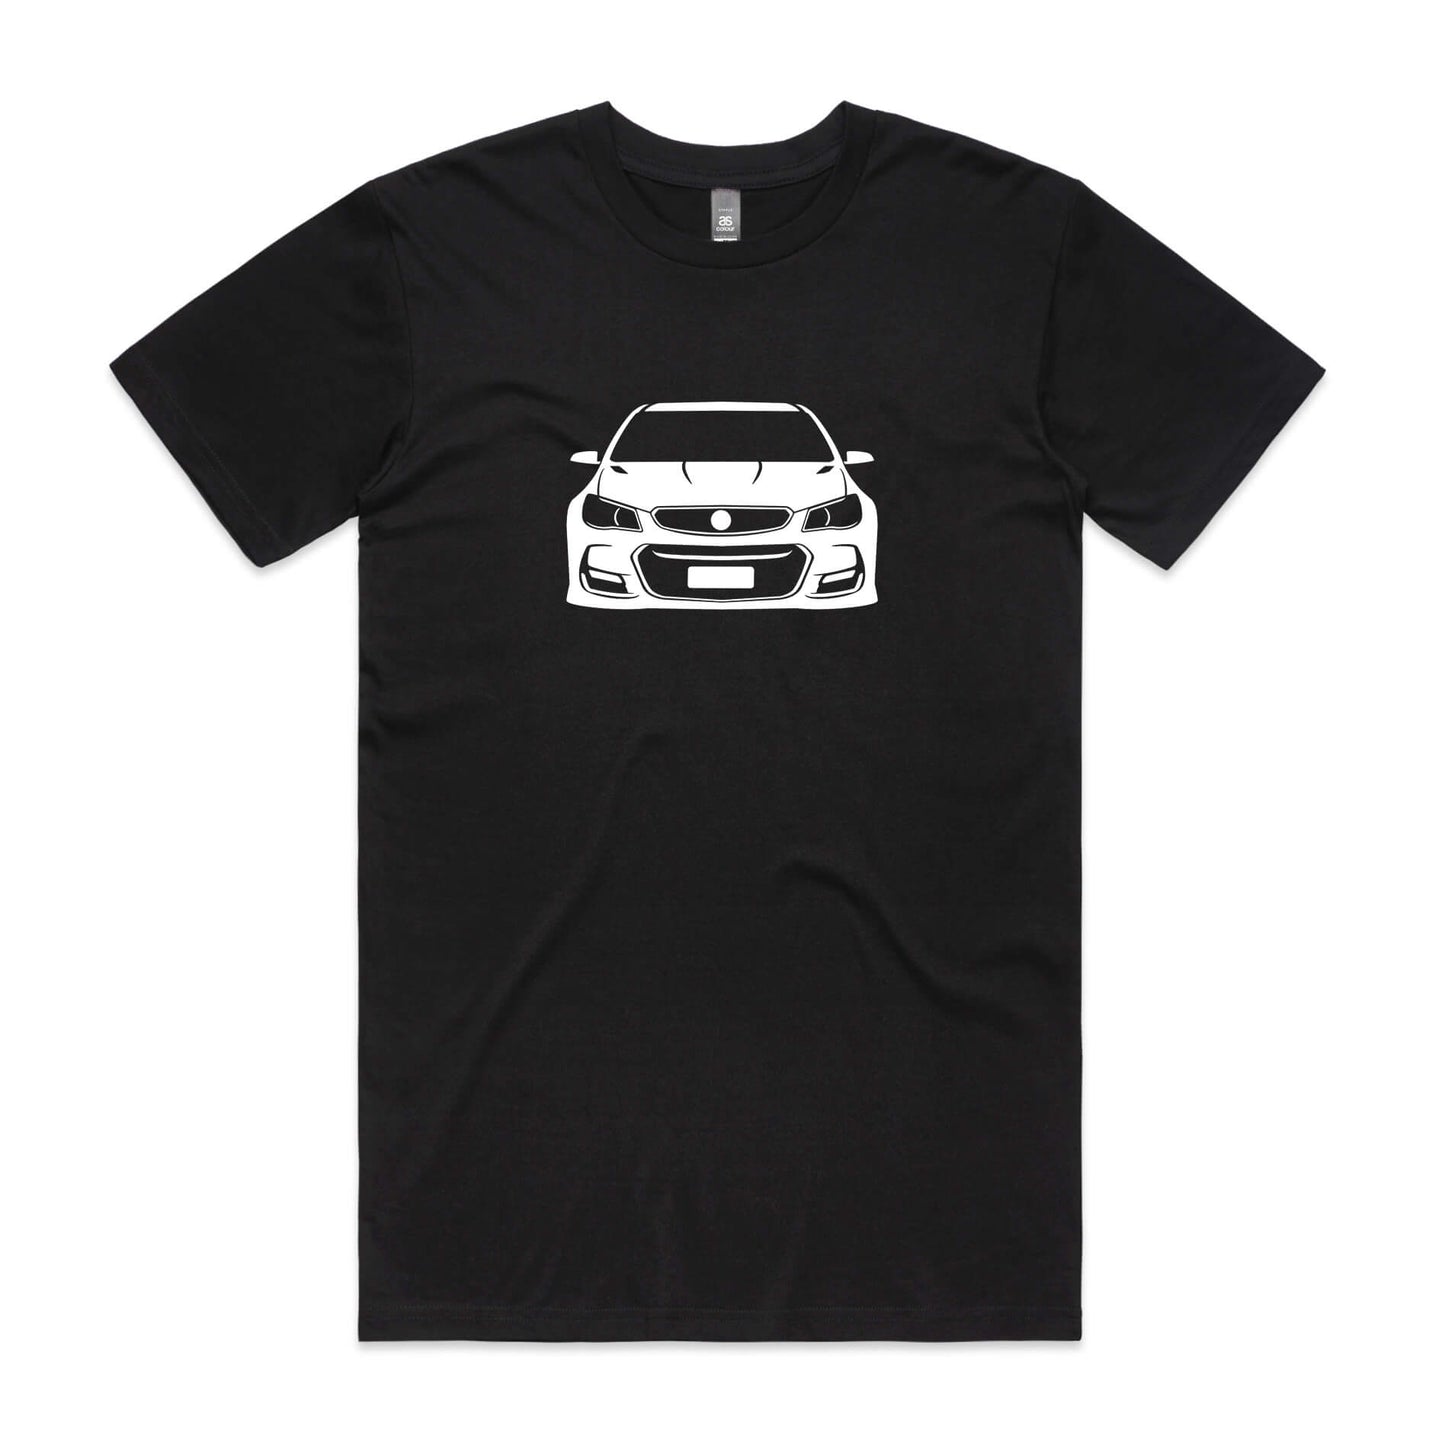 Holden VF Commodore t-shirt in black